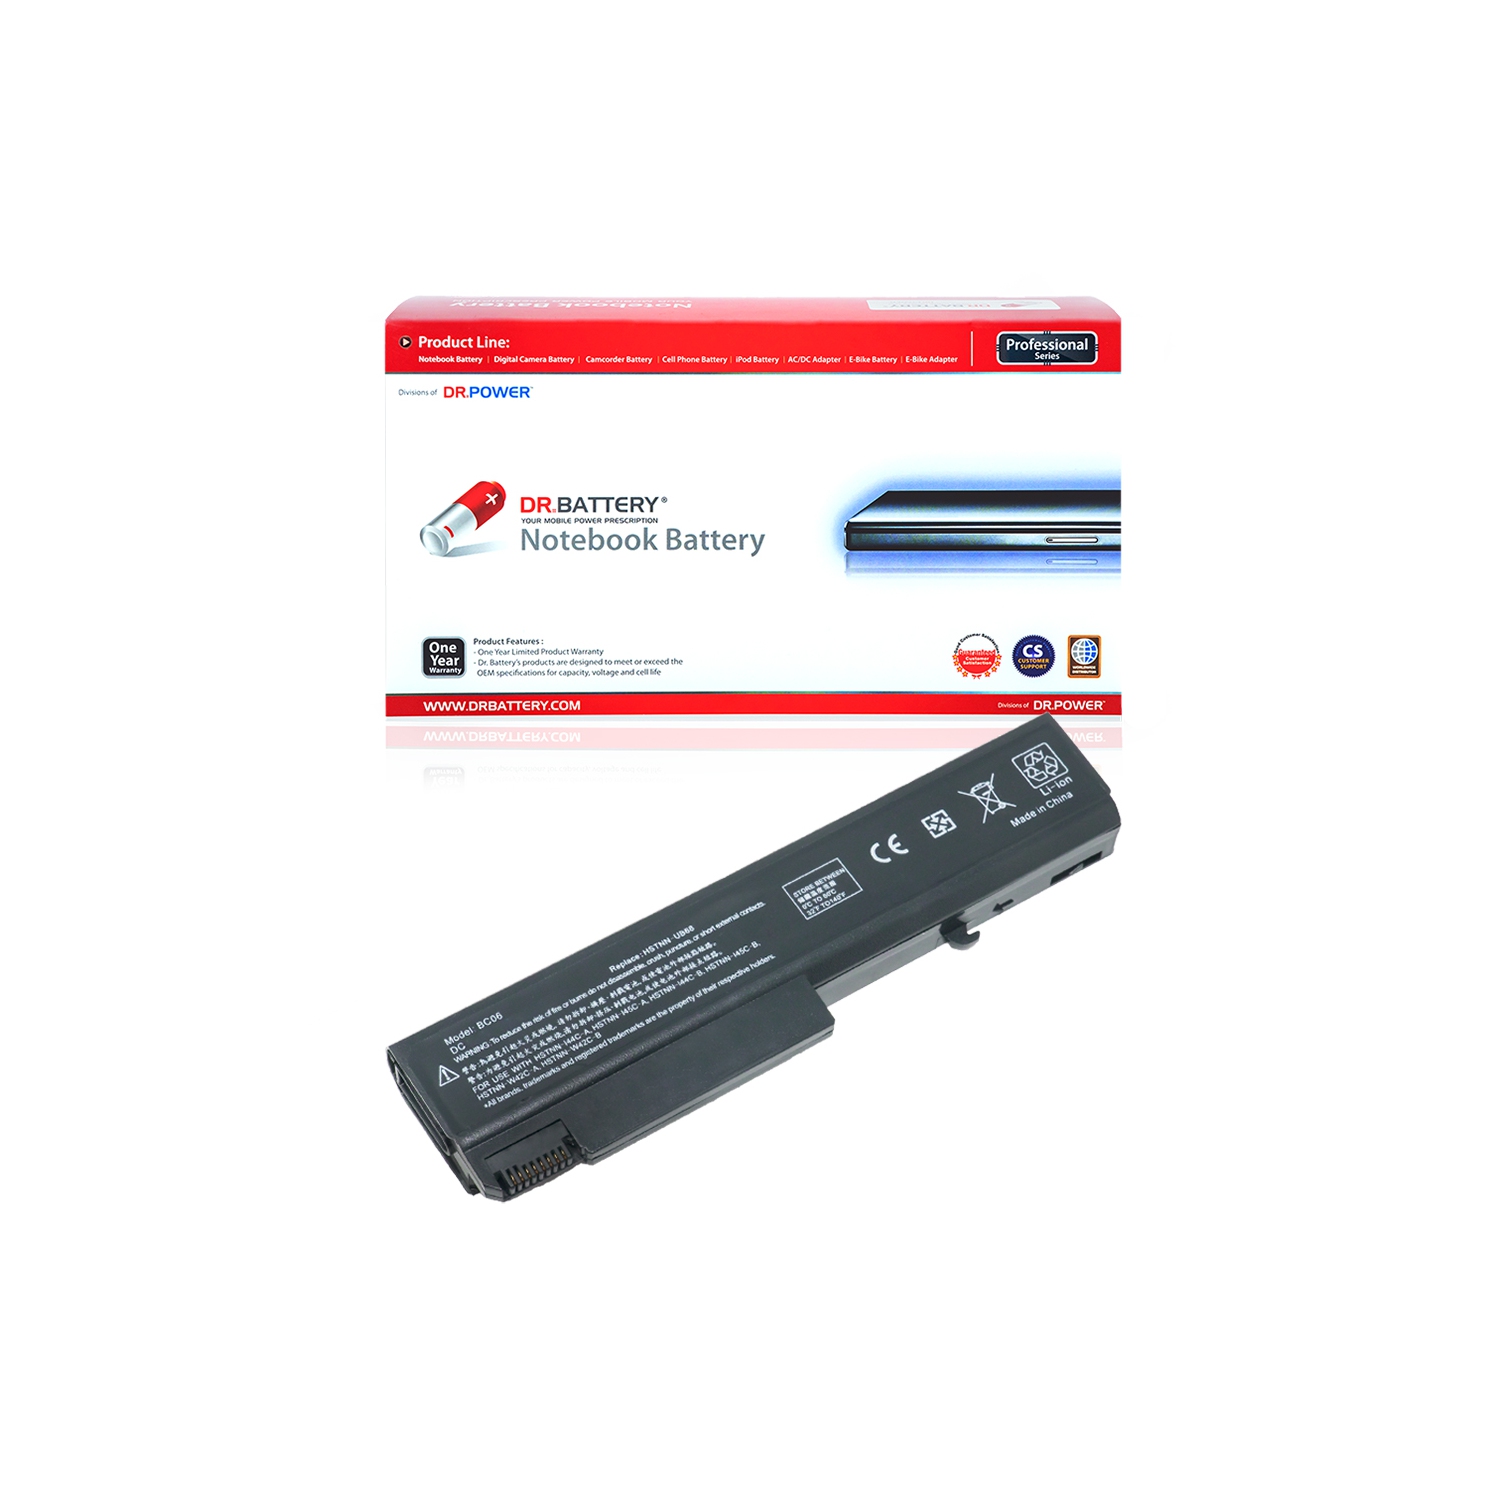 DR. BATTERY - Replacement Laptop Battery for HP EliteBook 6930p / 8440p / 8440w Mobile / 582033-001 / 586765-001 / 586765-002 / 593578-001 [10.8V / 48Wh] ***Free Shipping***